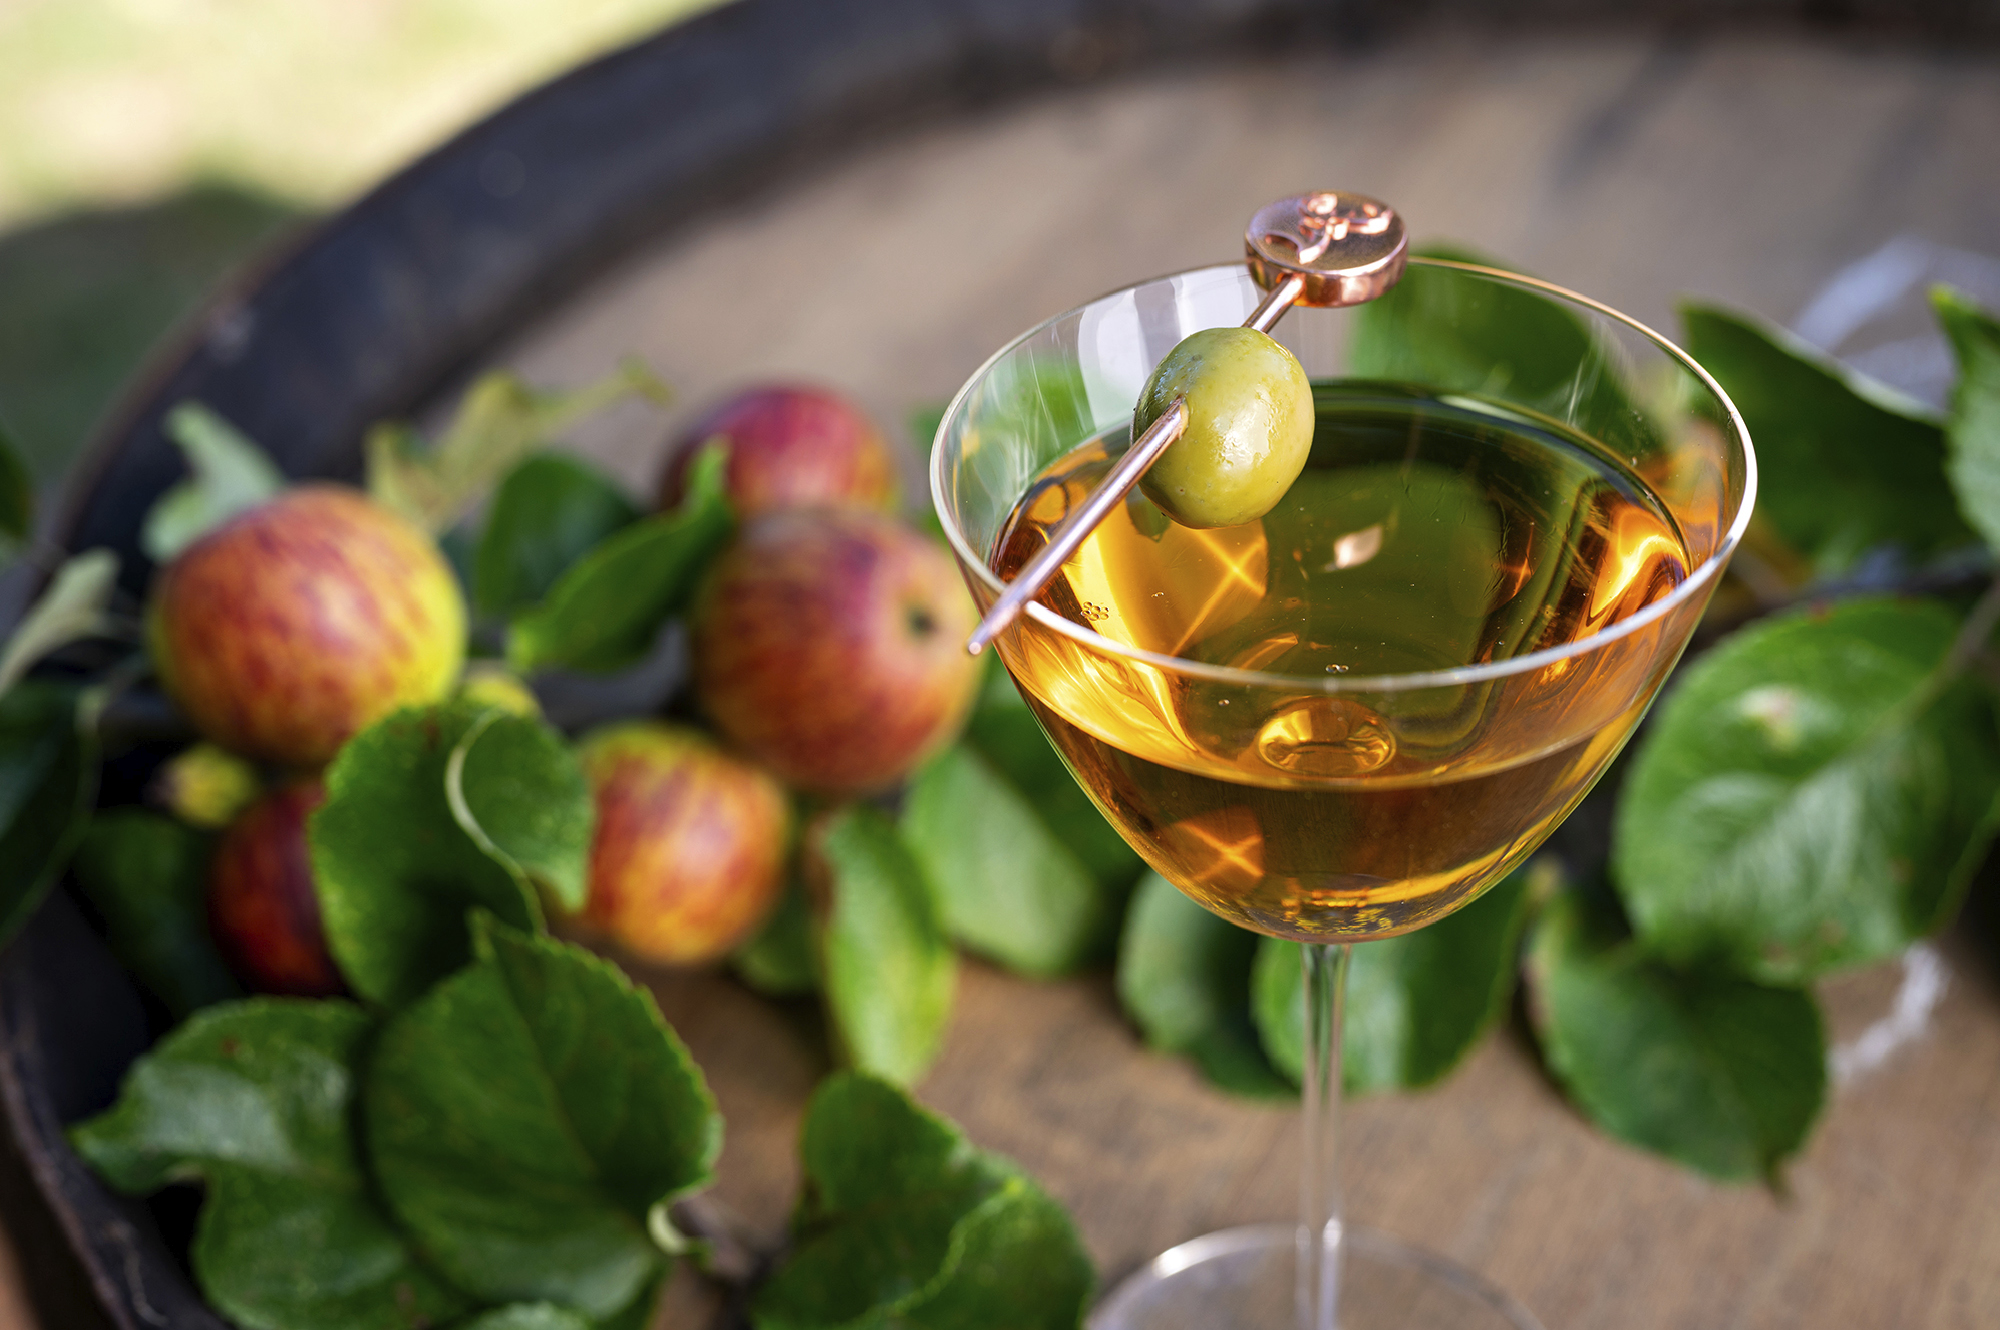 Glenfiddich Orchard Experiment works perfectly in a cocktail with vermouth, manzanilla sherry and Somerset Pomona